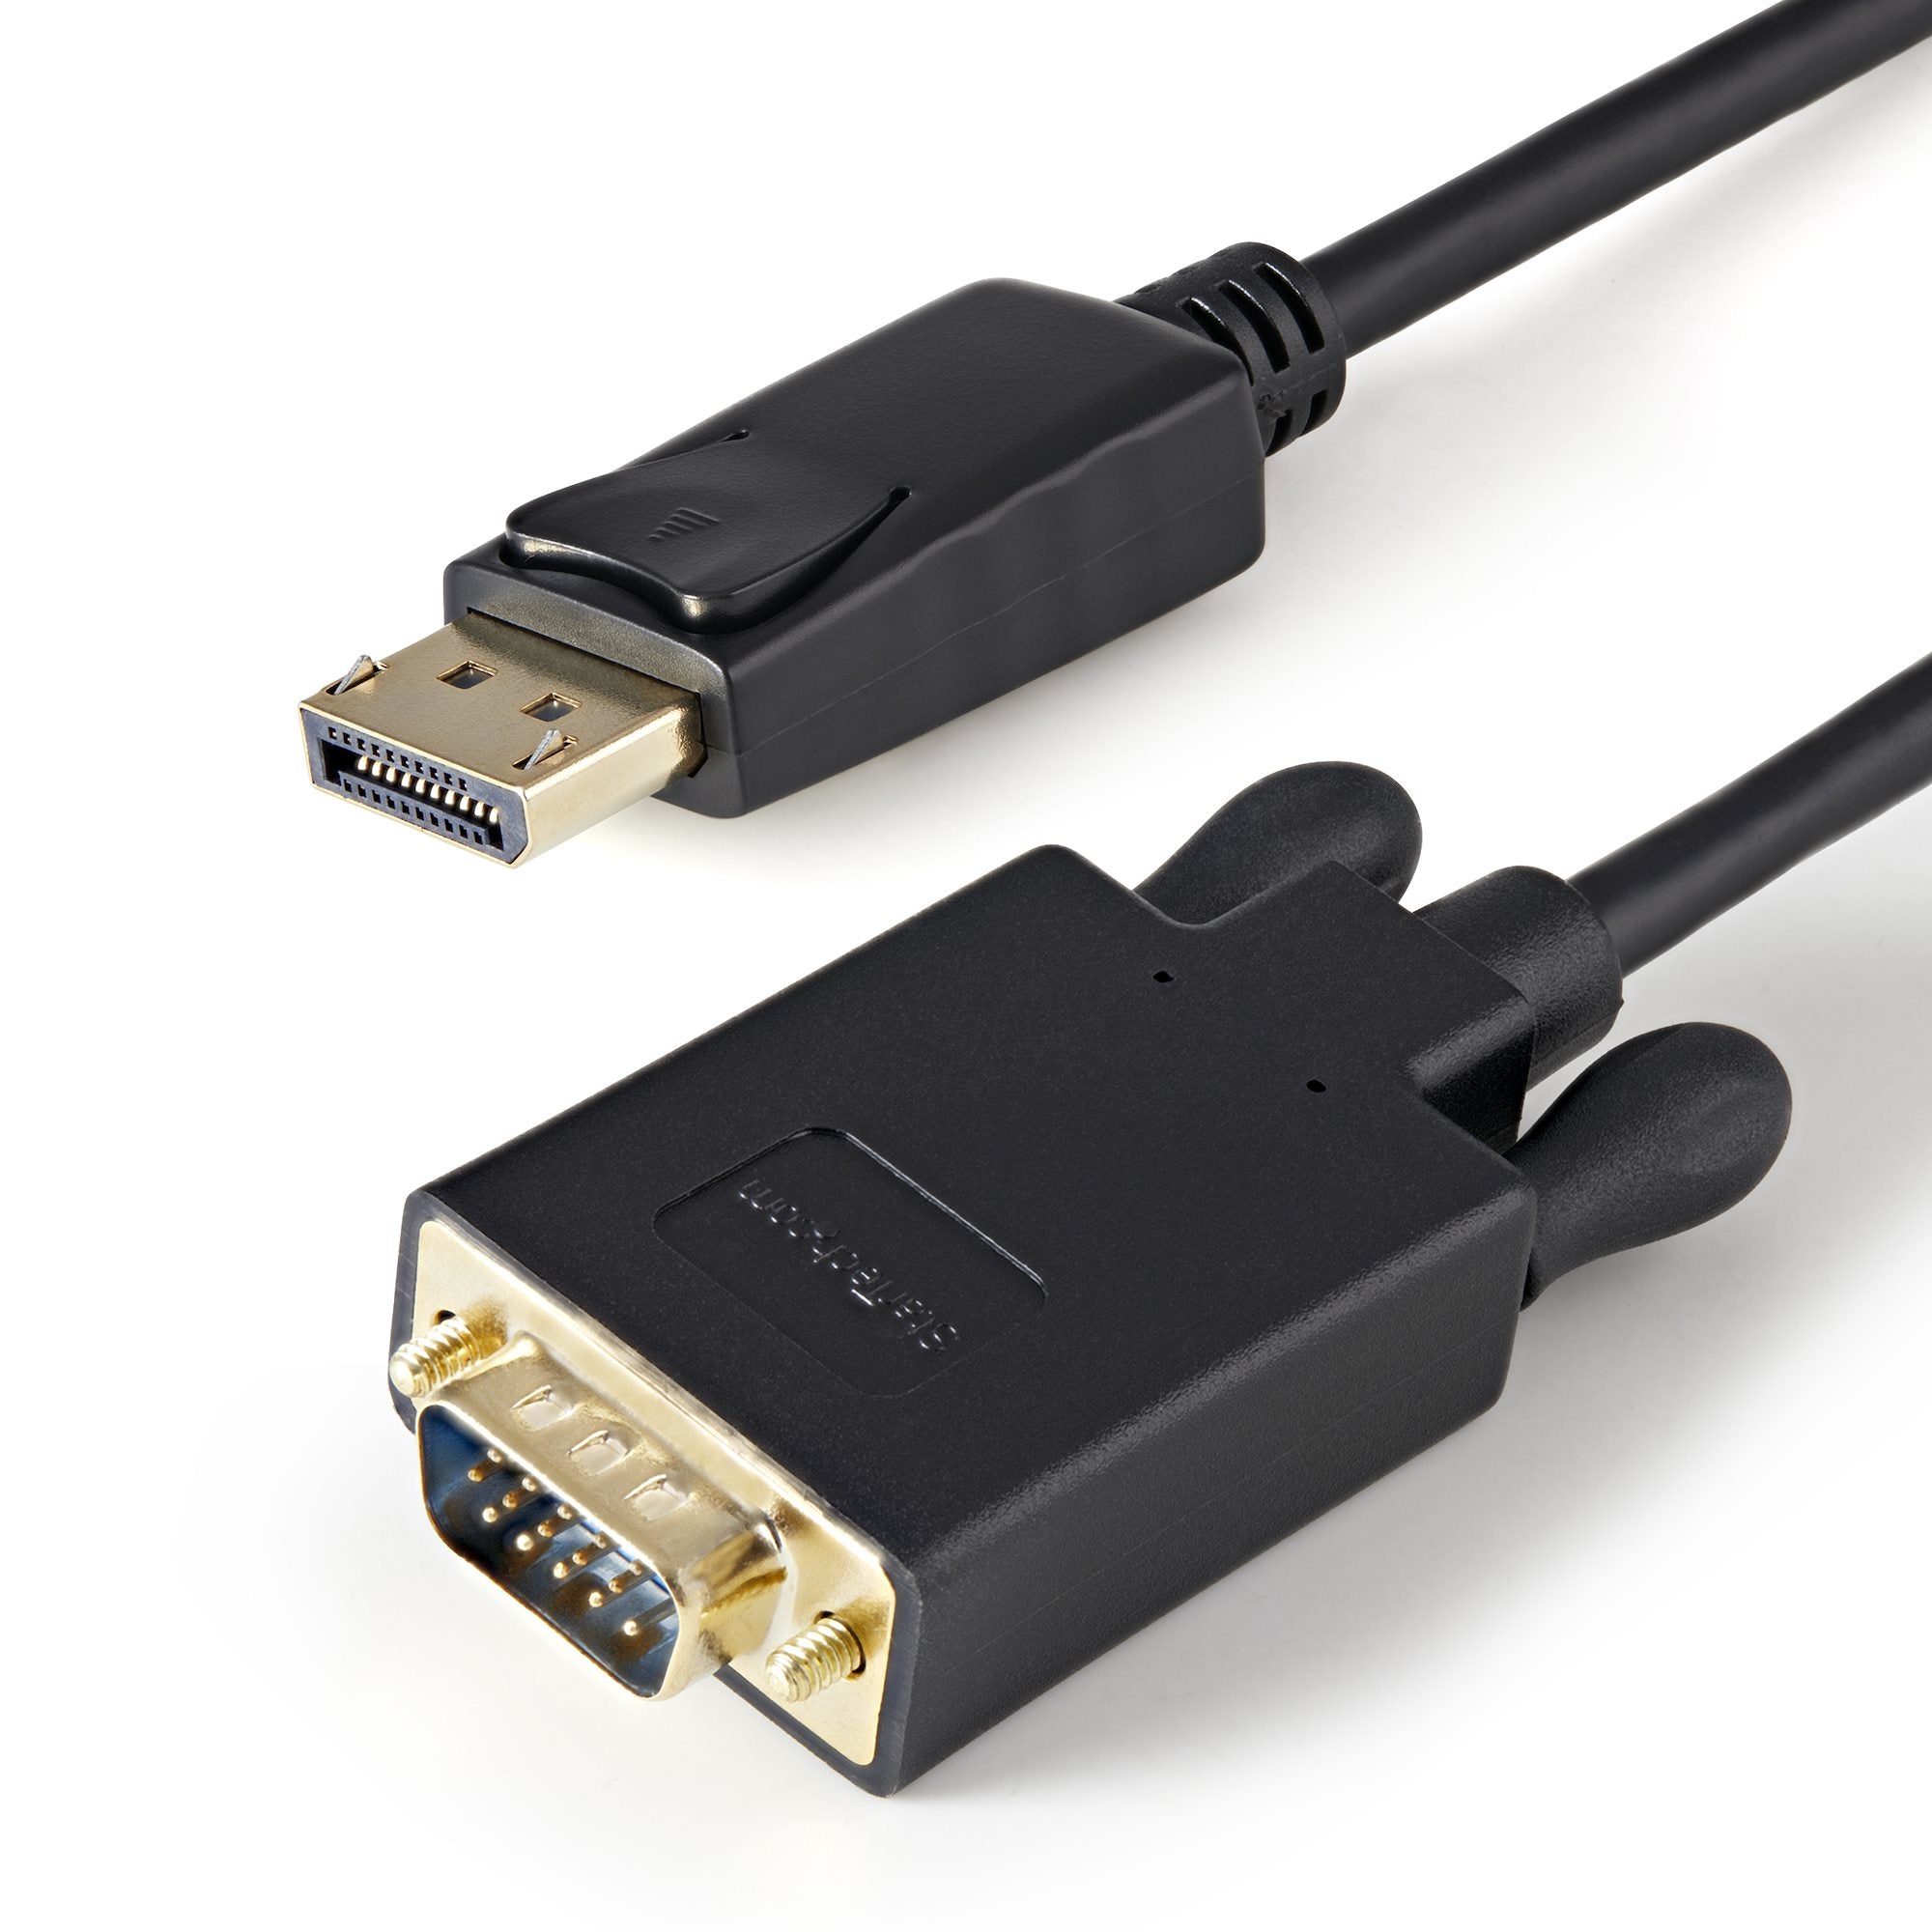 StarTech.com 3ft (1m) DisplayPort to VGA Cable - Active DisplayPort to VGA Adapter Cable - 1080p Video - DP to VGA Monitor Cable - DP 1.2 to VGA Converter - Latching DP Connector